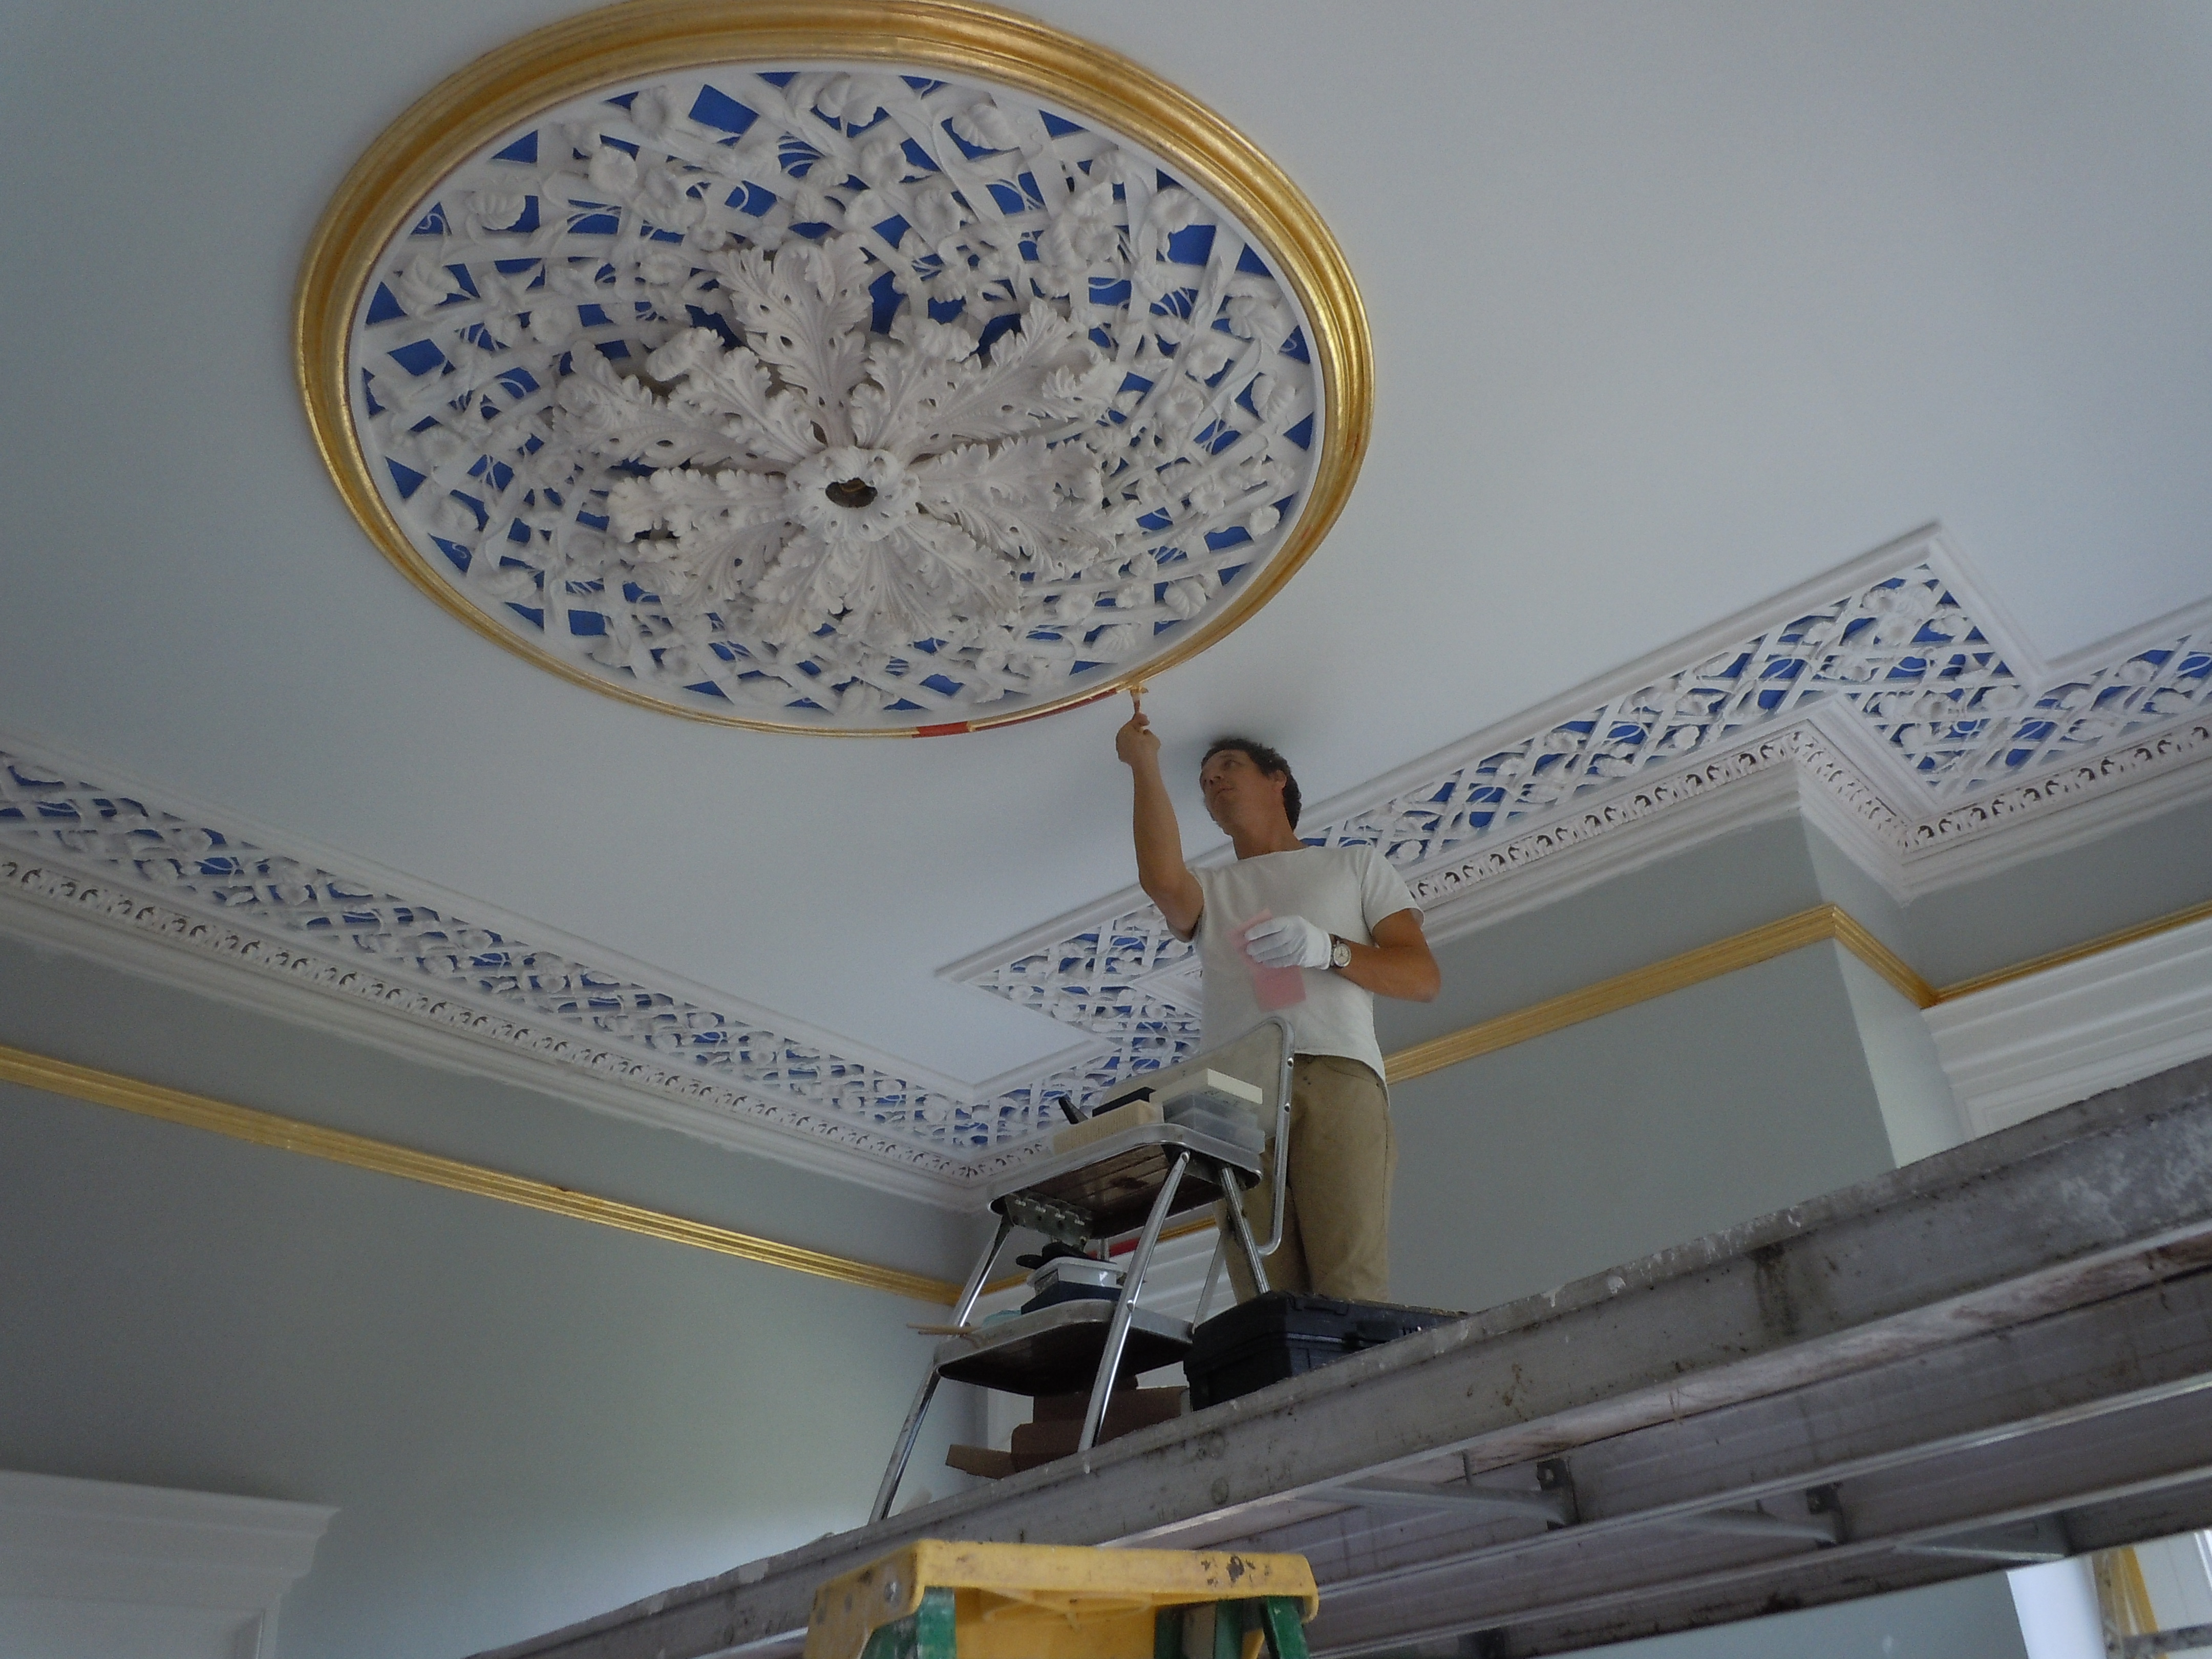  Greg Jacobs gilding the front room ceiling medallion.